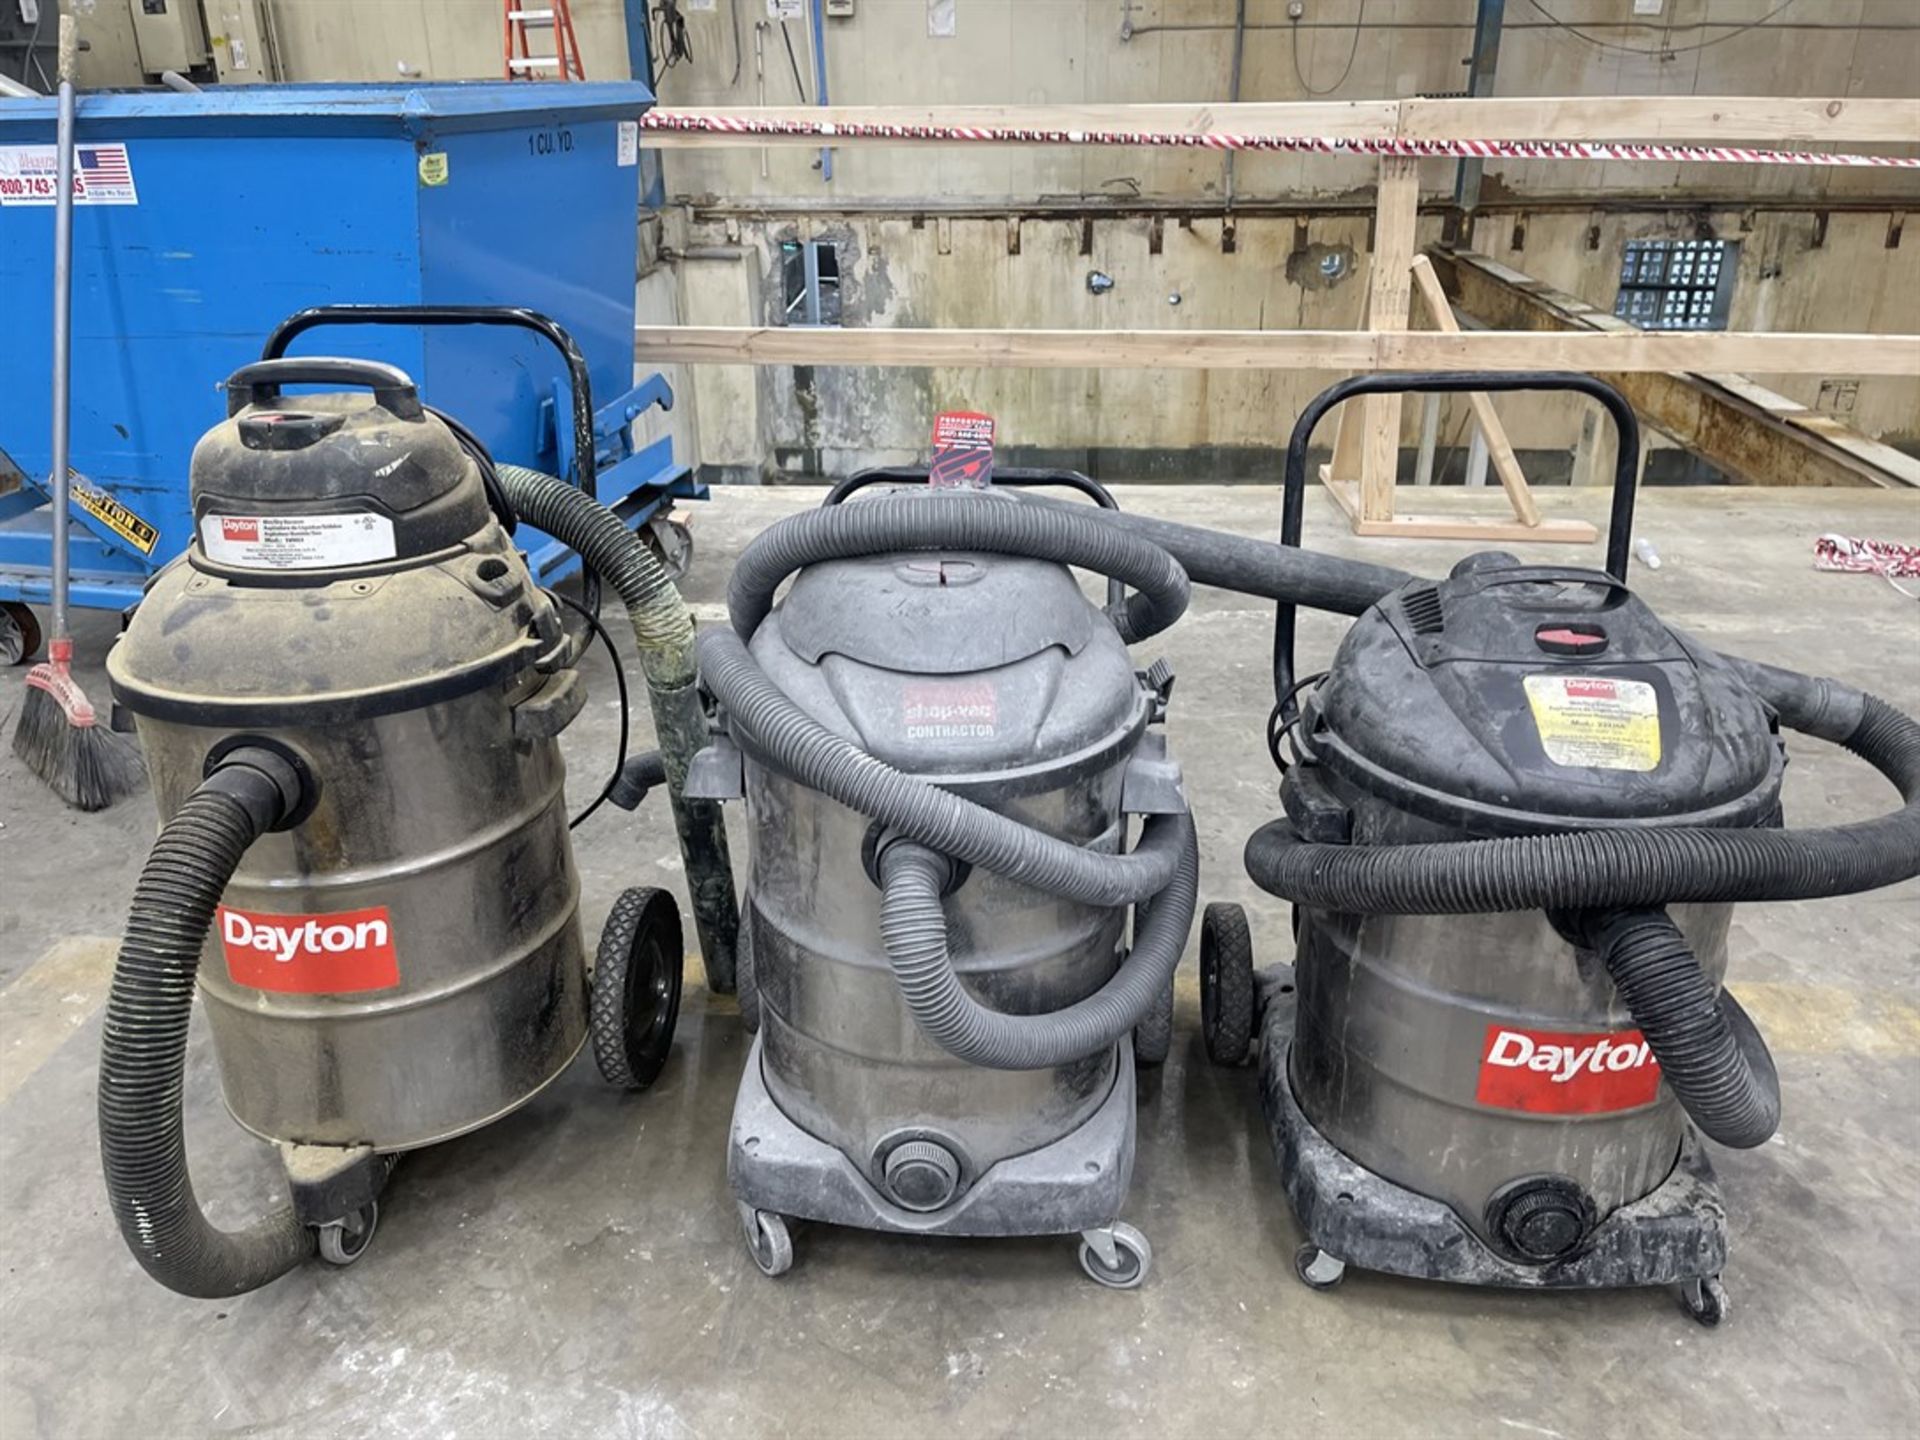 Lot of (2) DAYTON and (1) Shop VAC Wet/Dry Vacuums